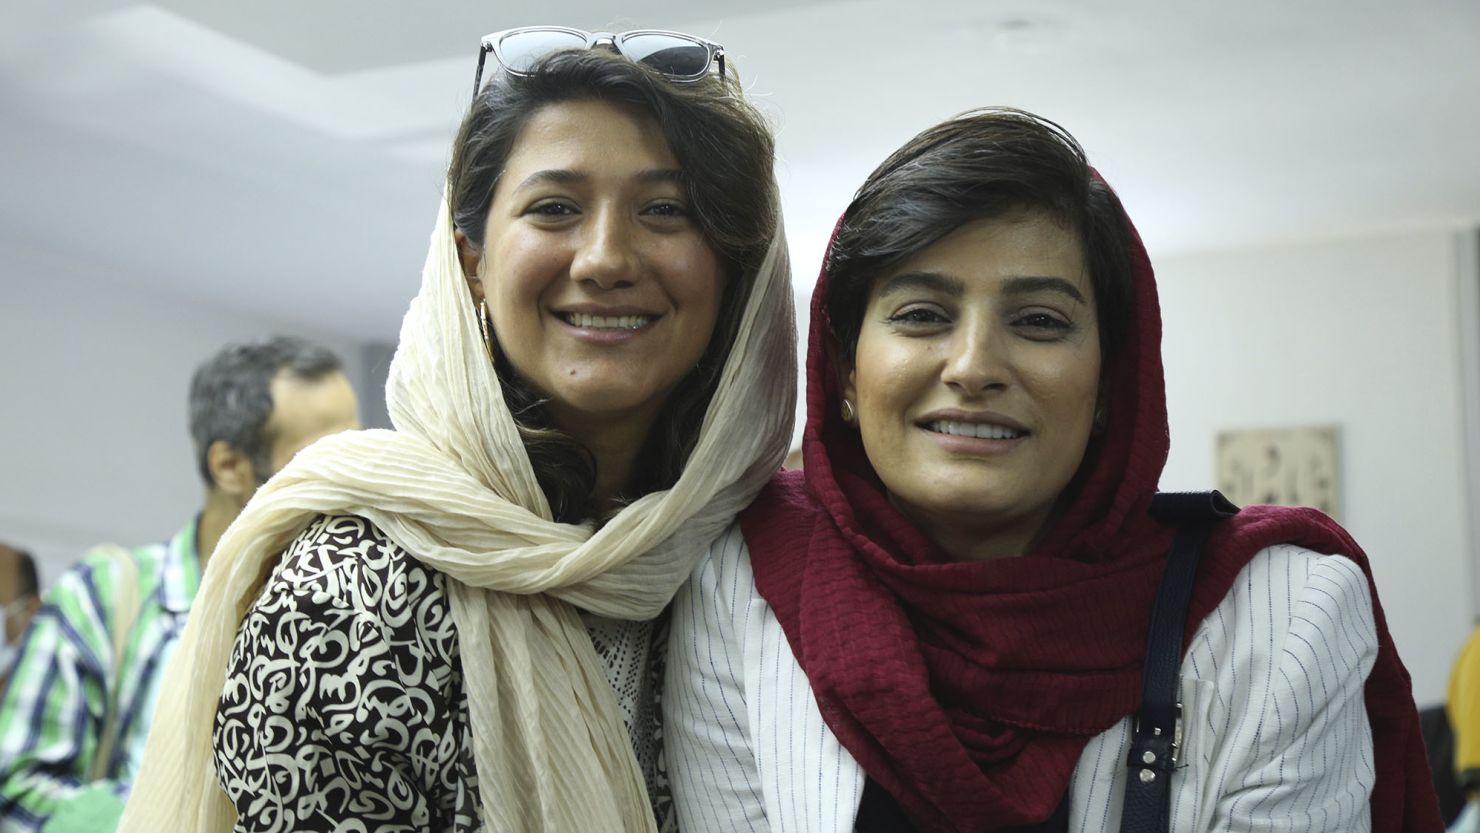 Journalists Niloufar Hamedi and Elaheh Mohammadi, pictured in August 2022, were arrested by the Iranian authorities after reporting on the death of Mahsa Amini.